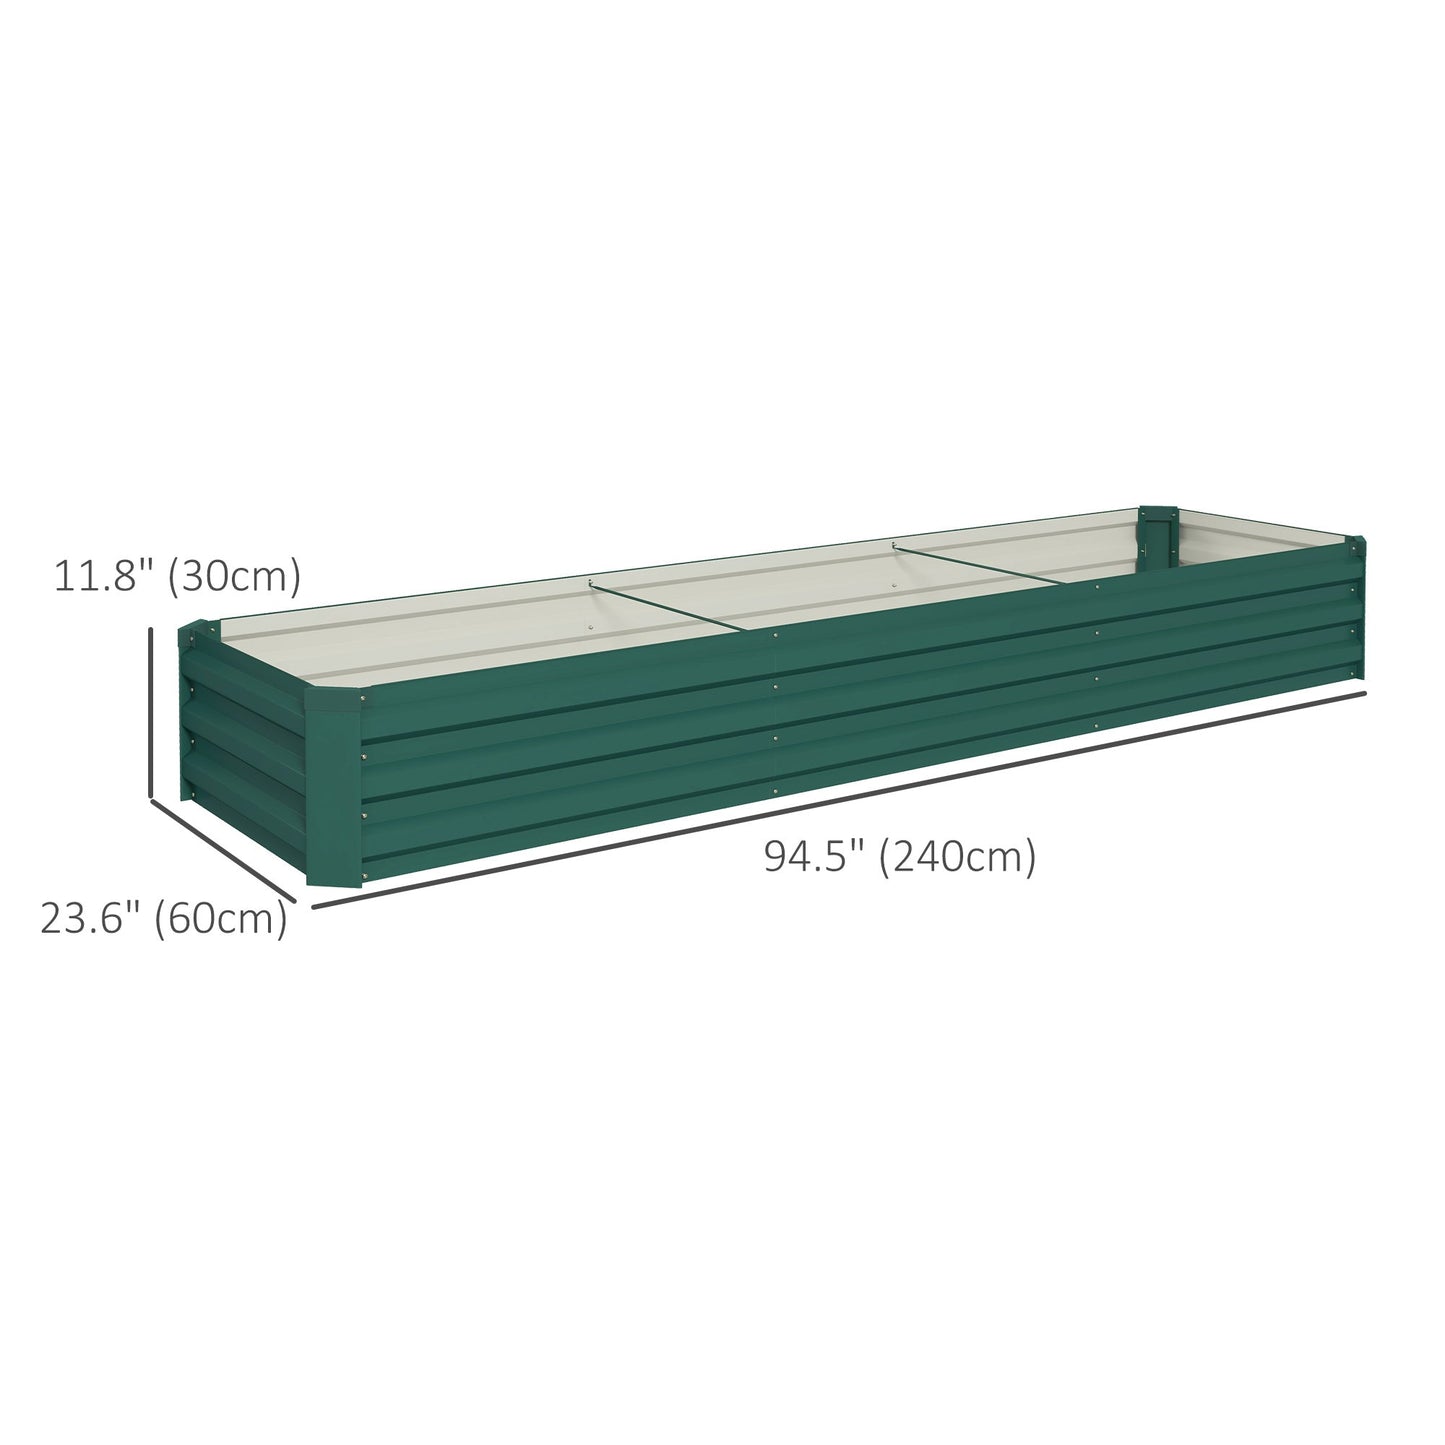 8'x2'x1' Galvanized Raised Bed, Large Elevated Planter Box for Growing Flowers, Herbs and Vegetables, Green - Gallery Canada